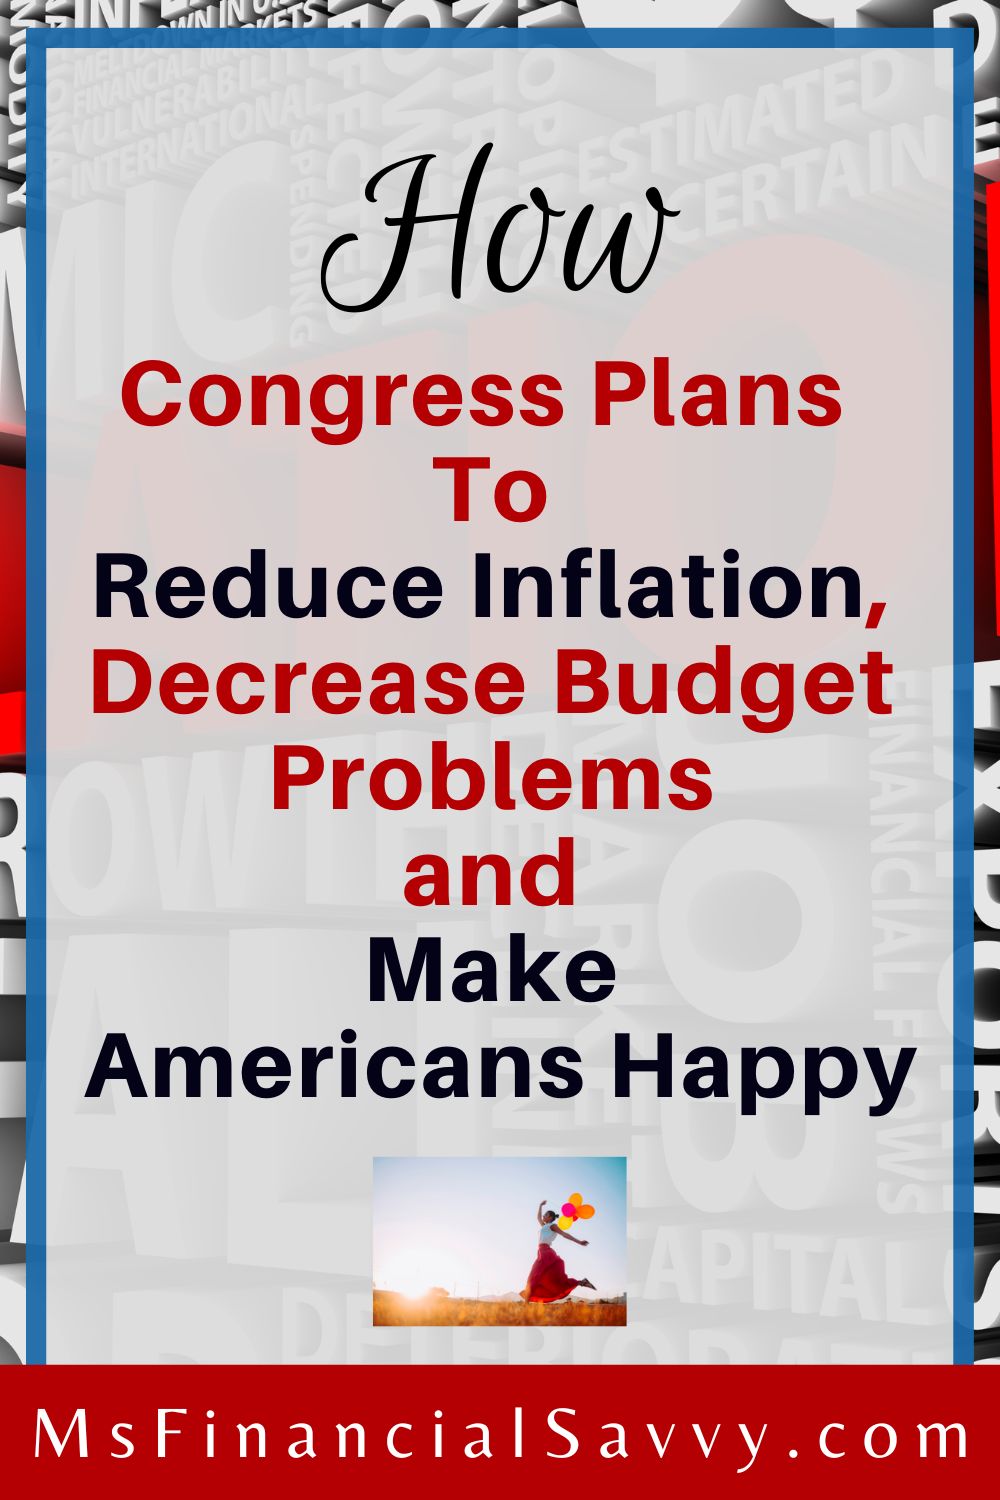 How Congress Plans To Reduce Inflation, Decrease Budget Problems, and Make Americans Happy